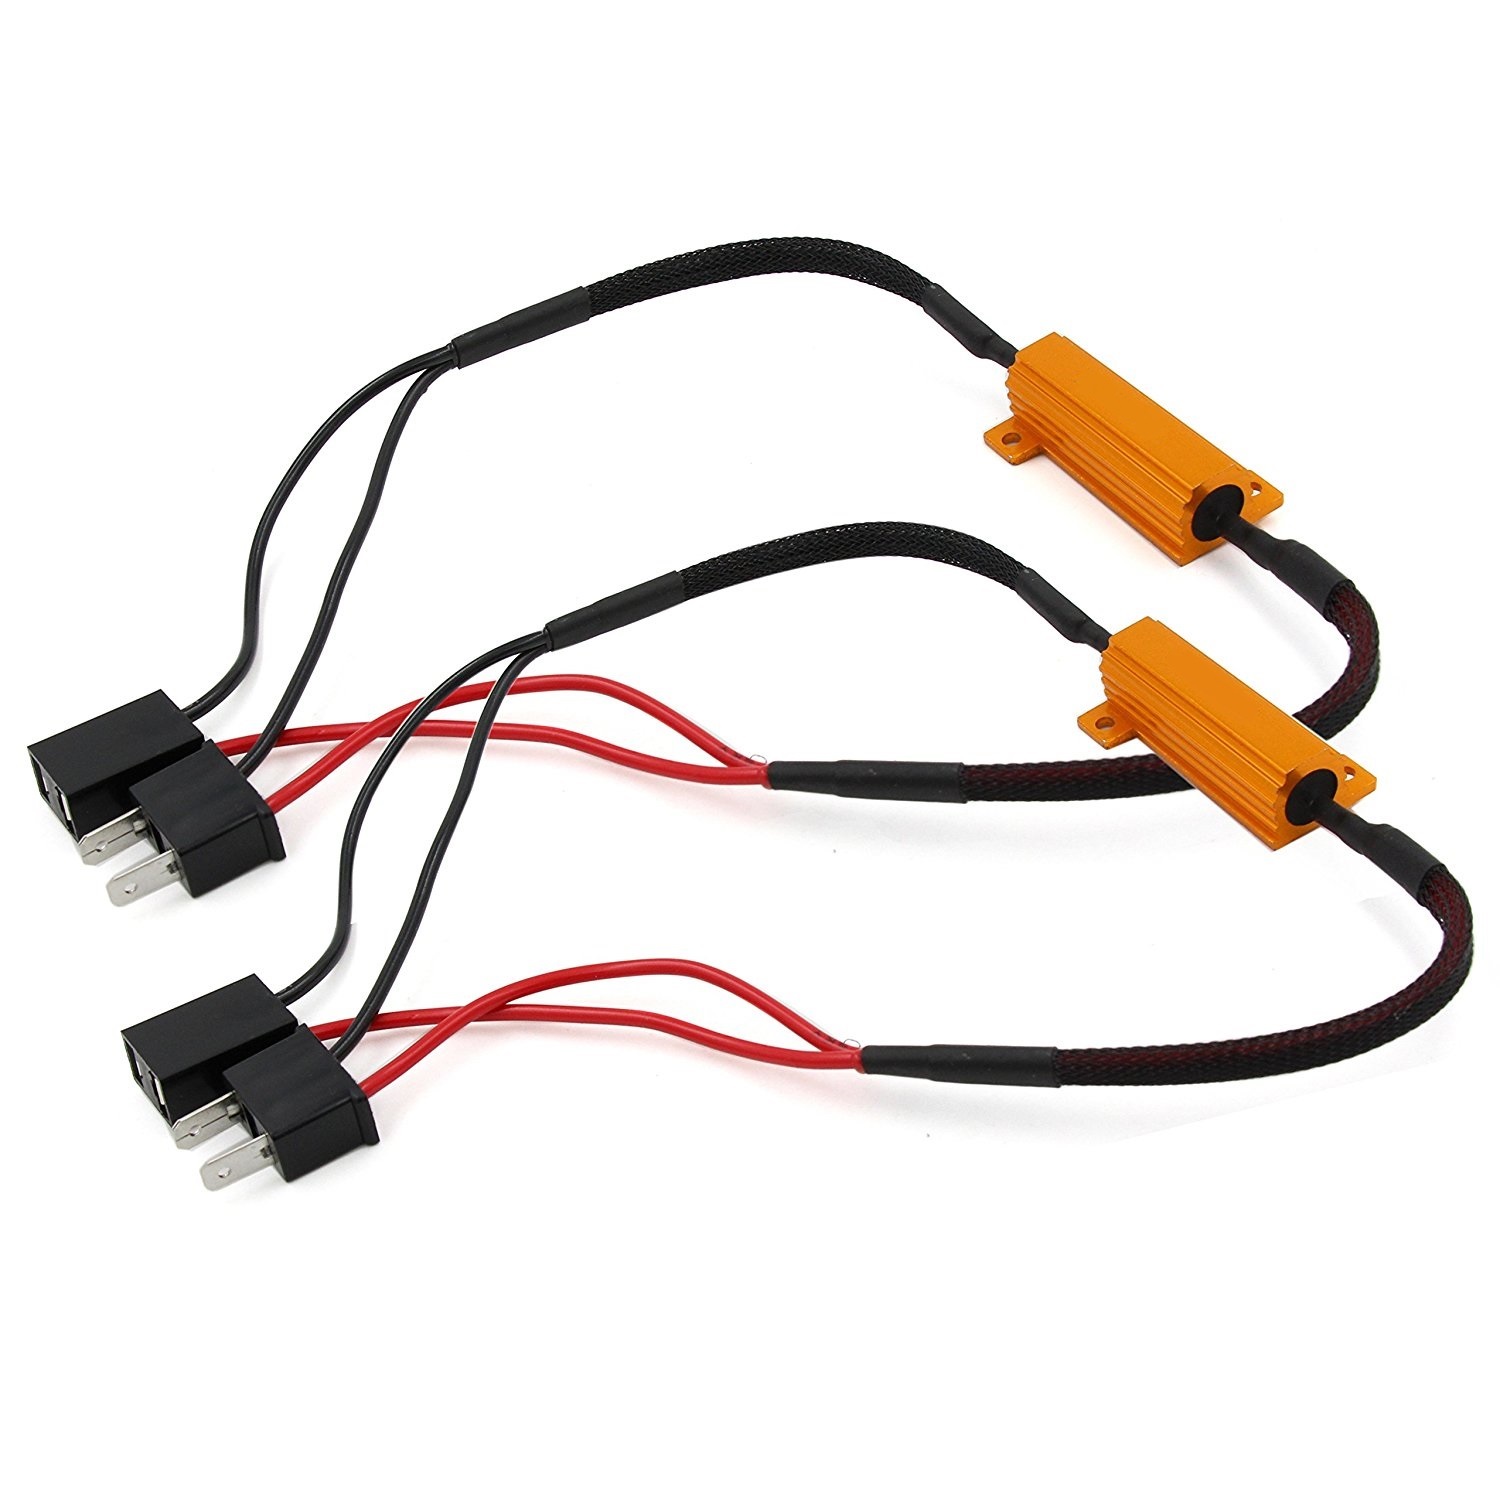 h7 canbus decoder, h7 can bus decoder vw, canbus decoder h7, h7 warning  canceller, h7 led warning canceller, h7 led anti flicker resistor, h7  led canceller